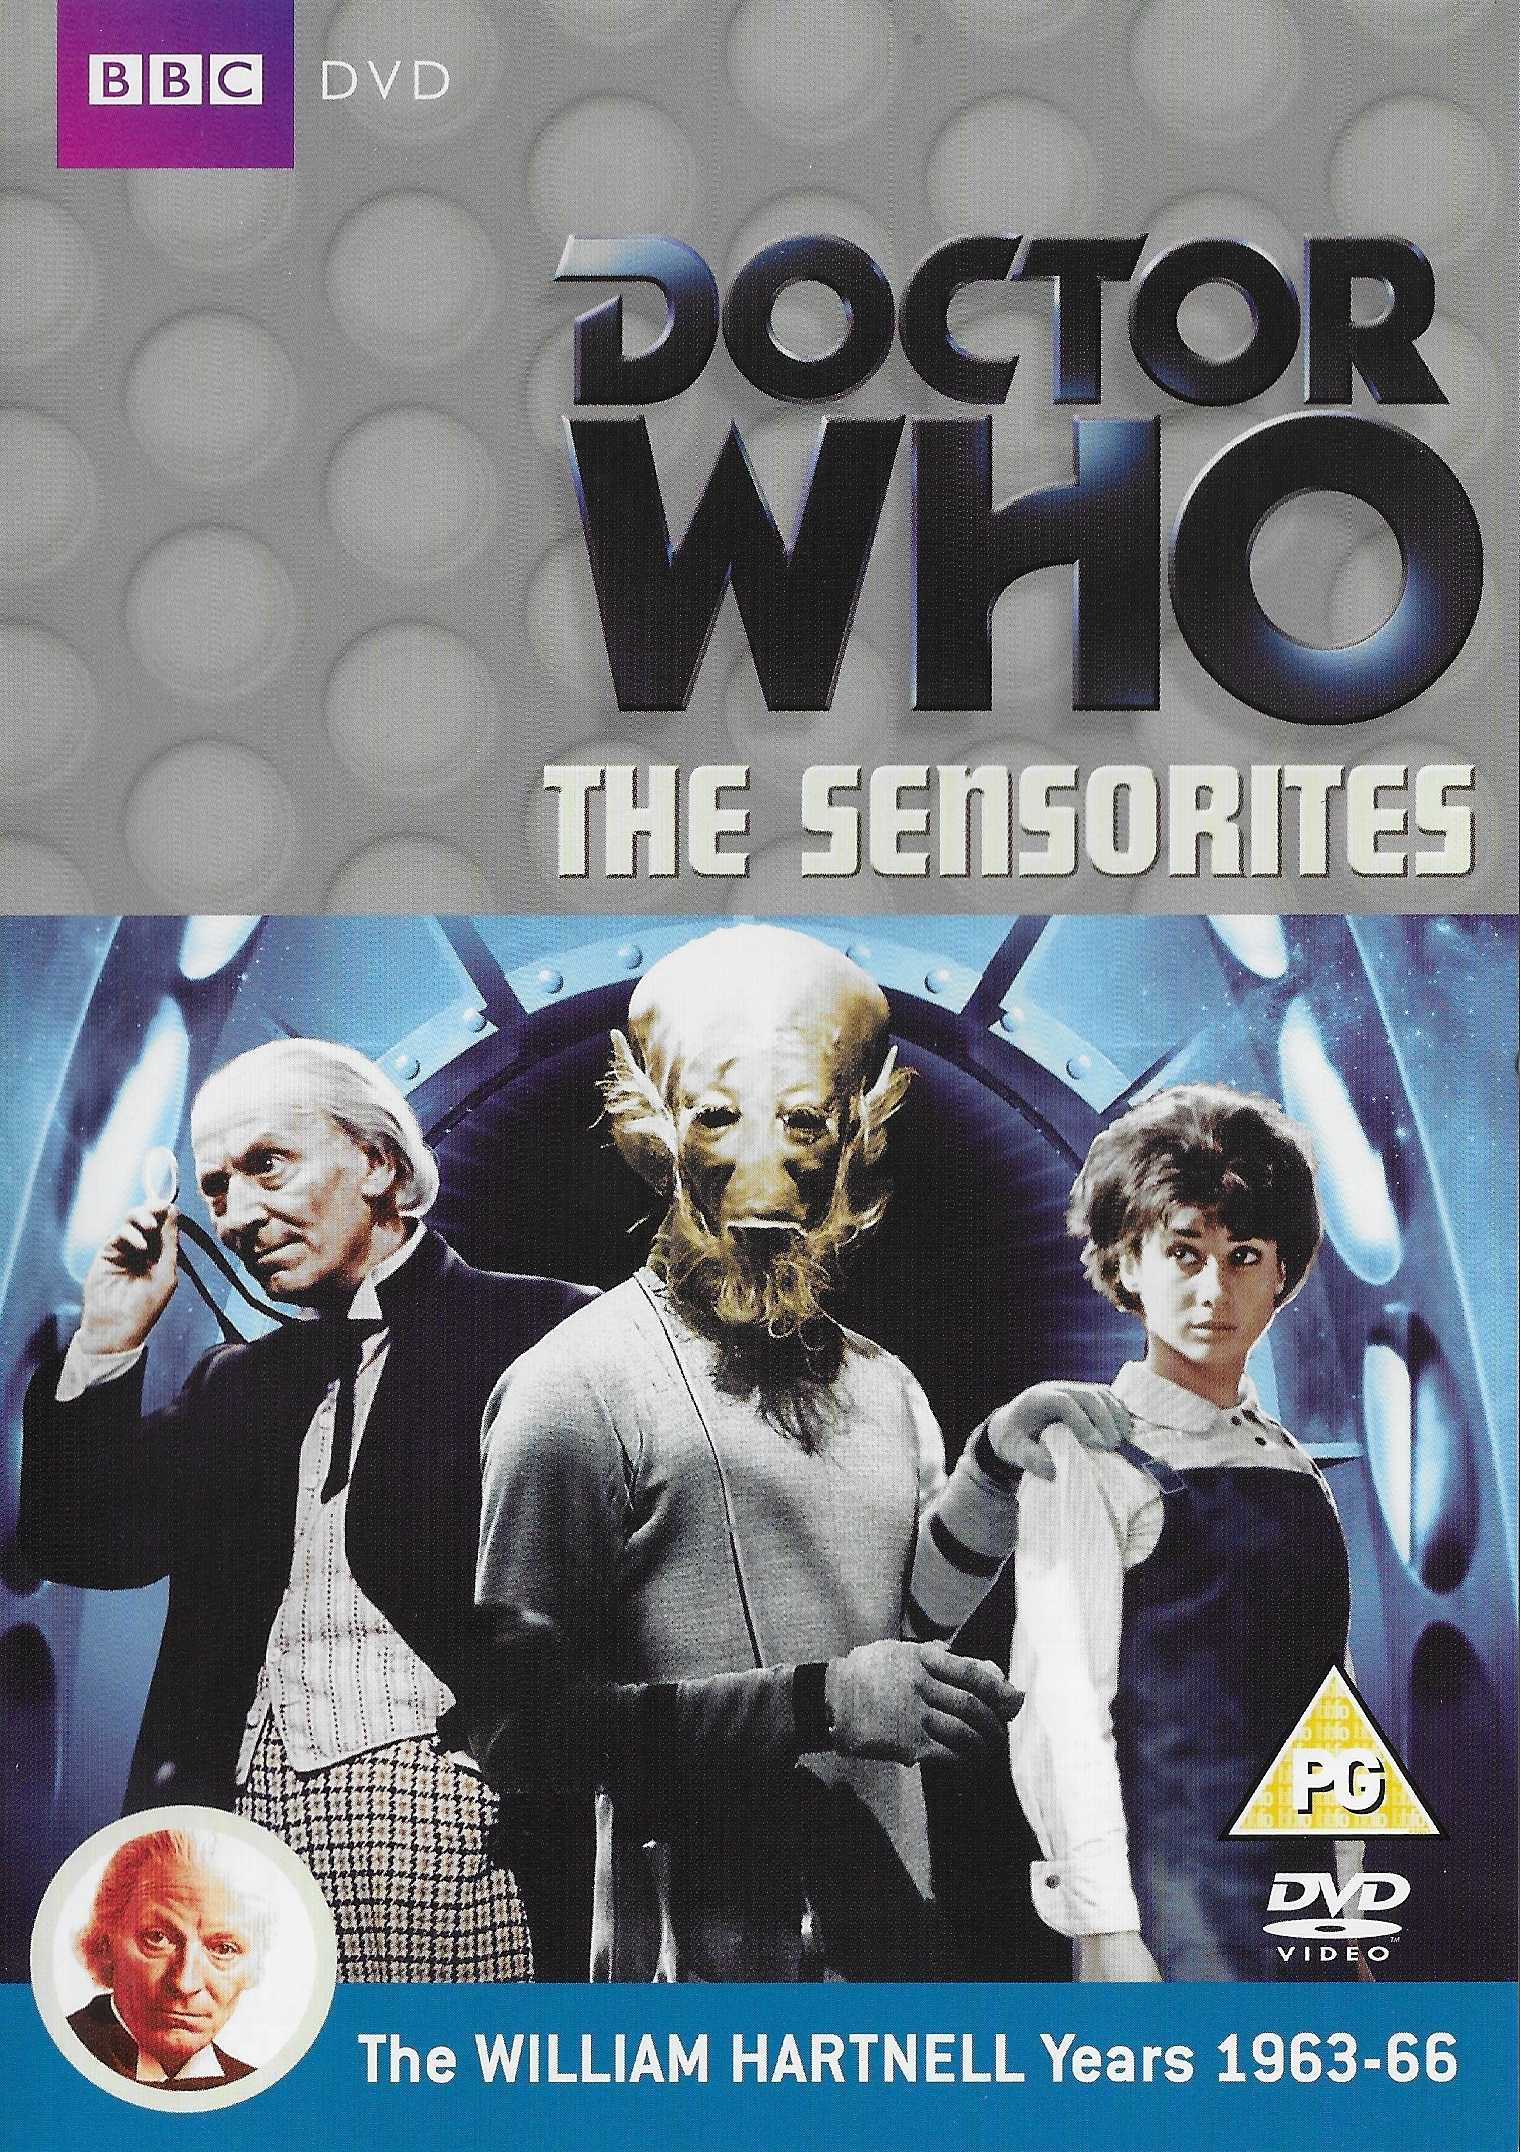 Picture of BBCDVD 3377 Doctor Who - The Sensorites by artist Peter R. Newman from the BBC dvds - Records and Tapes library